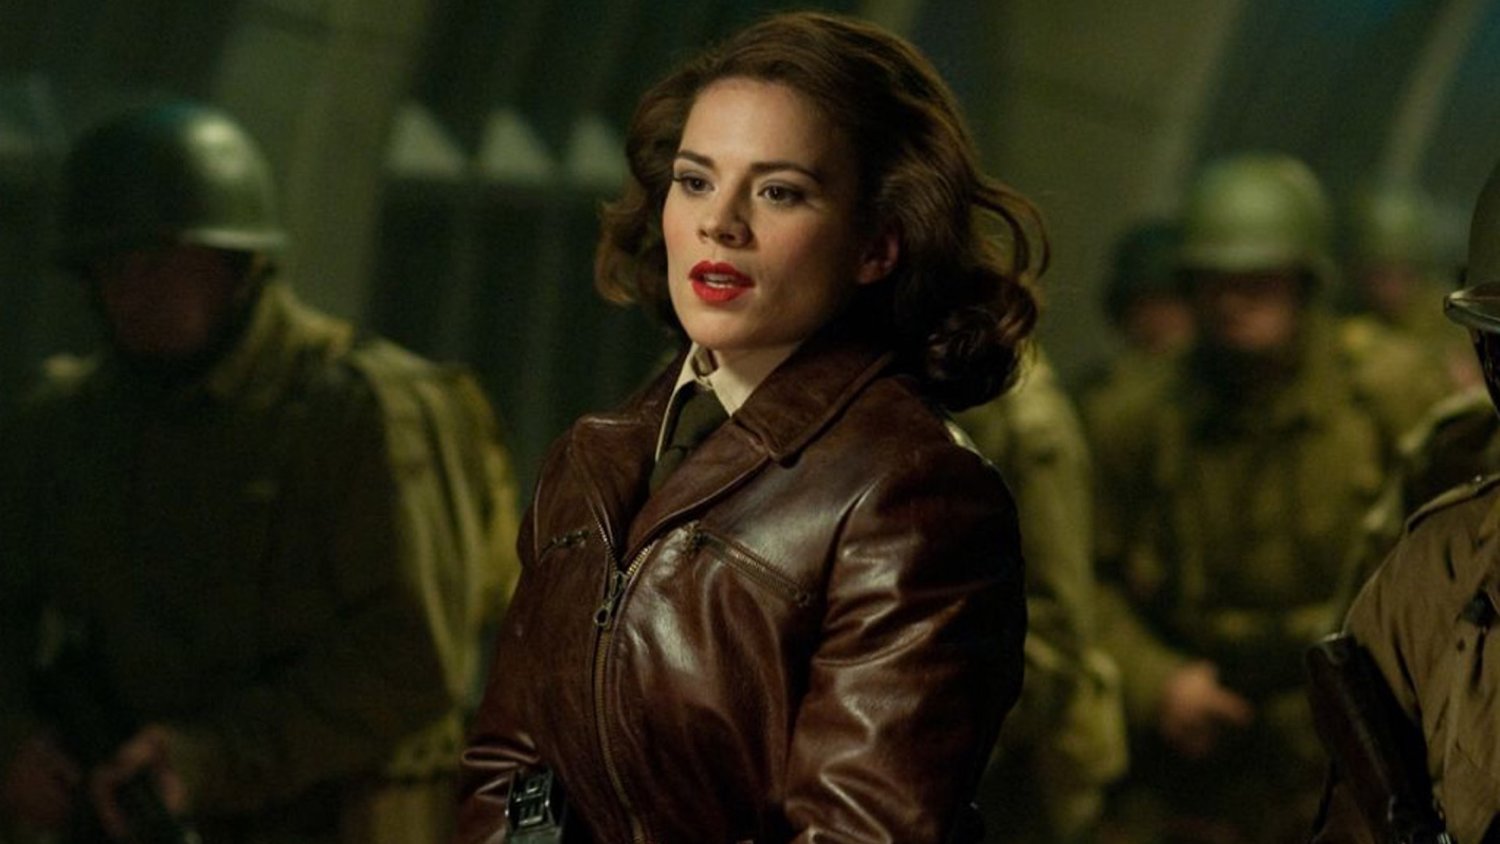 50. Peggy Carter (Hayley Atwell)